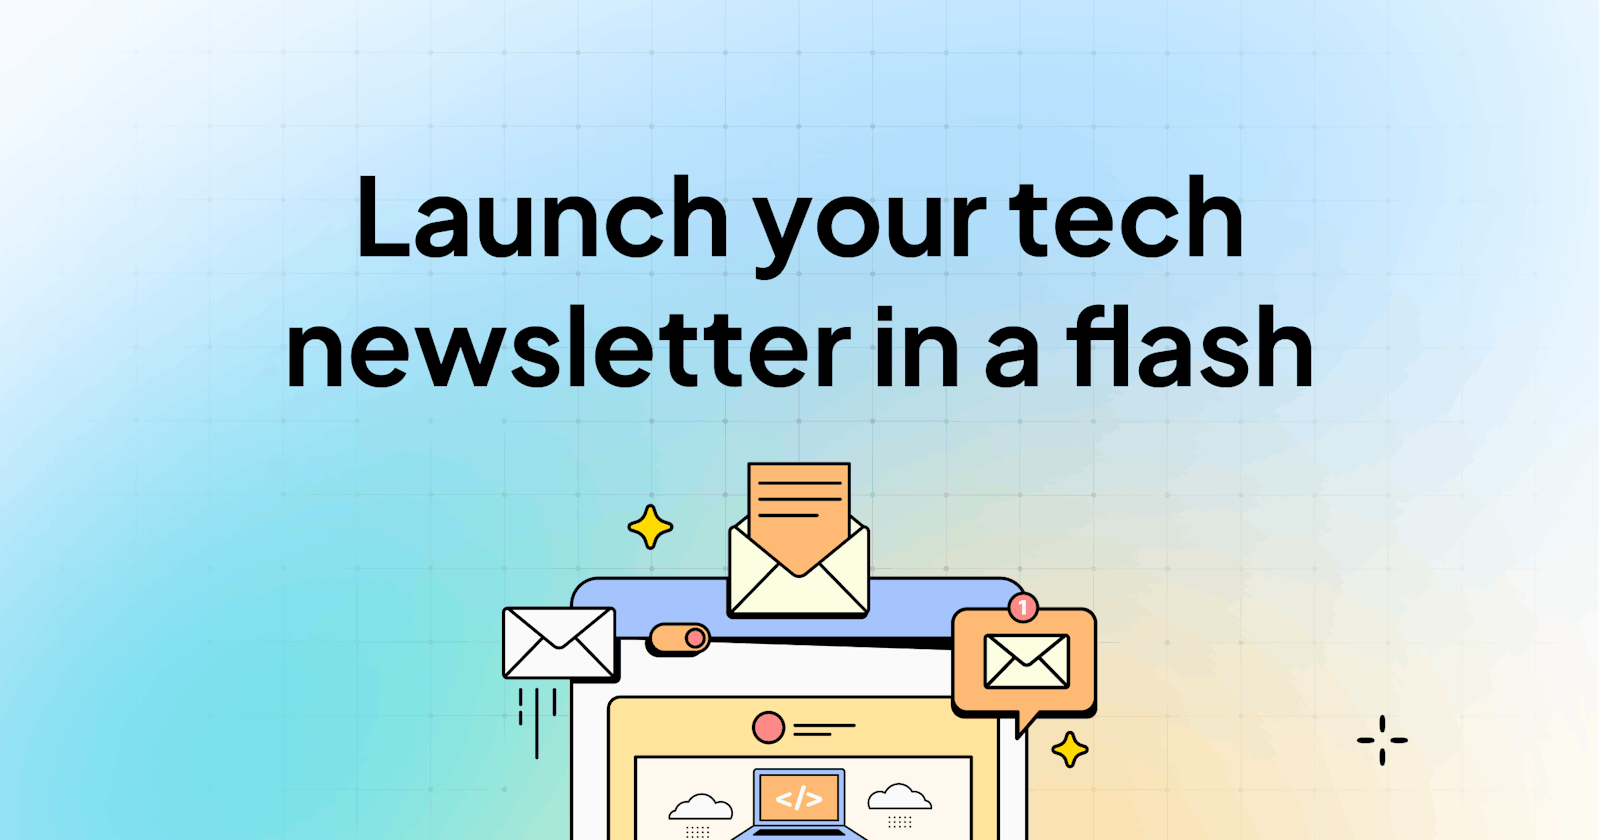 Publishing a newsletter is now as easy as blogging